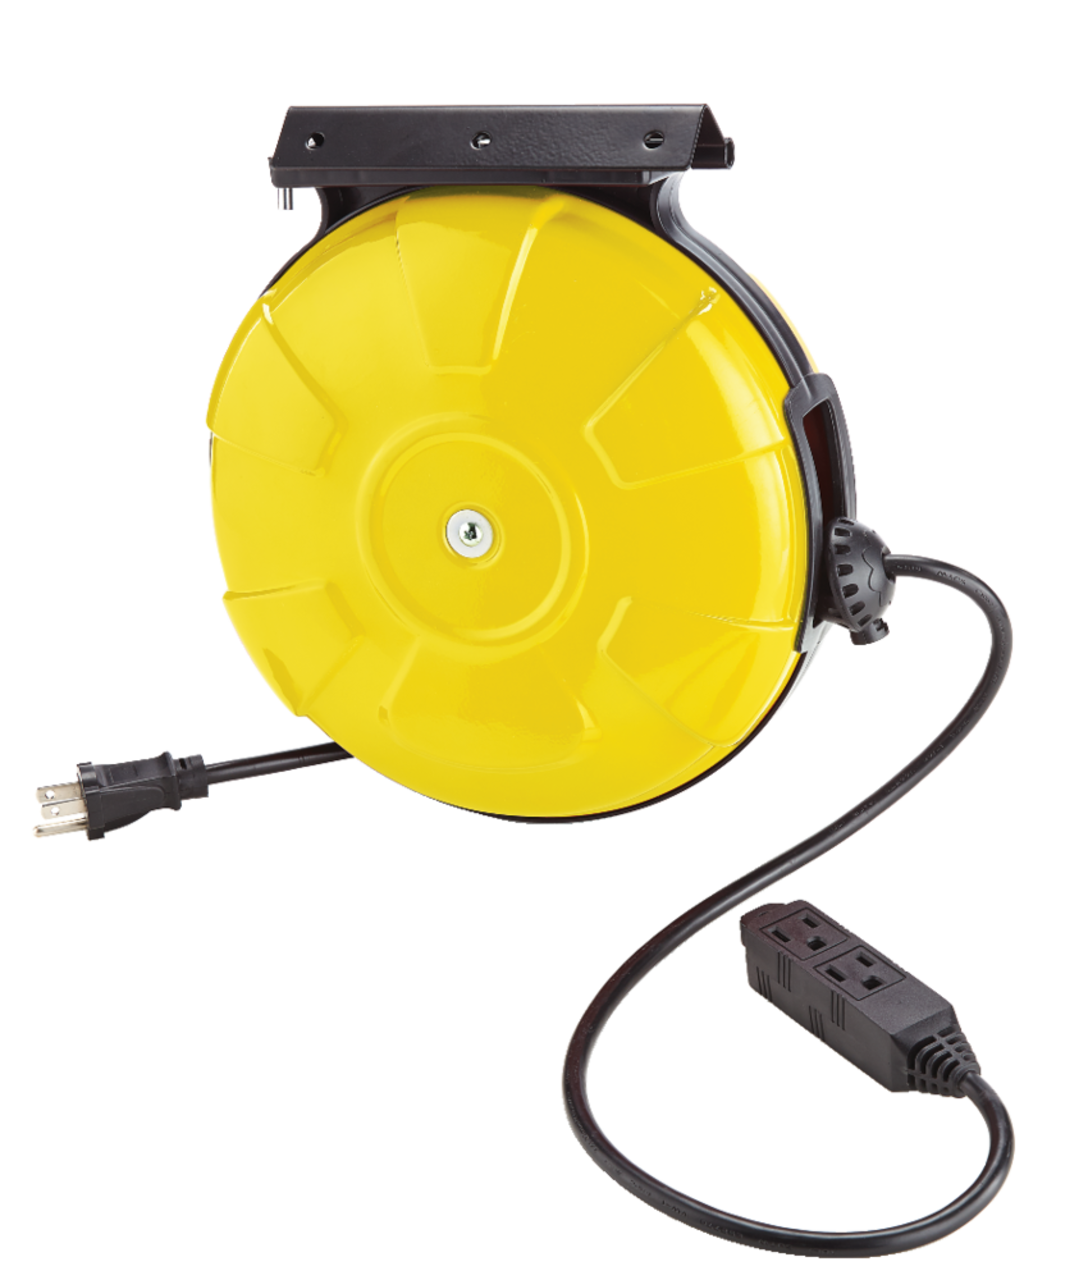 AC DELCO Retractable Electric Extension Cord Reel- 30-Ft- rated10A